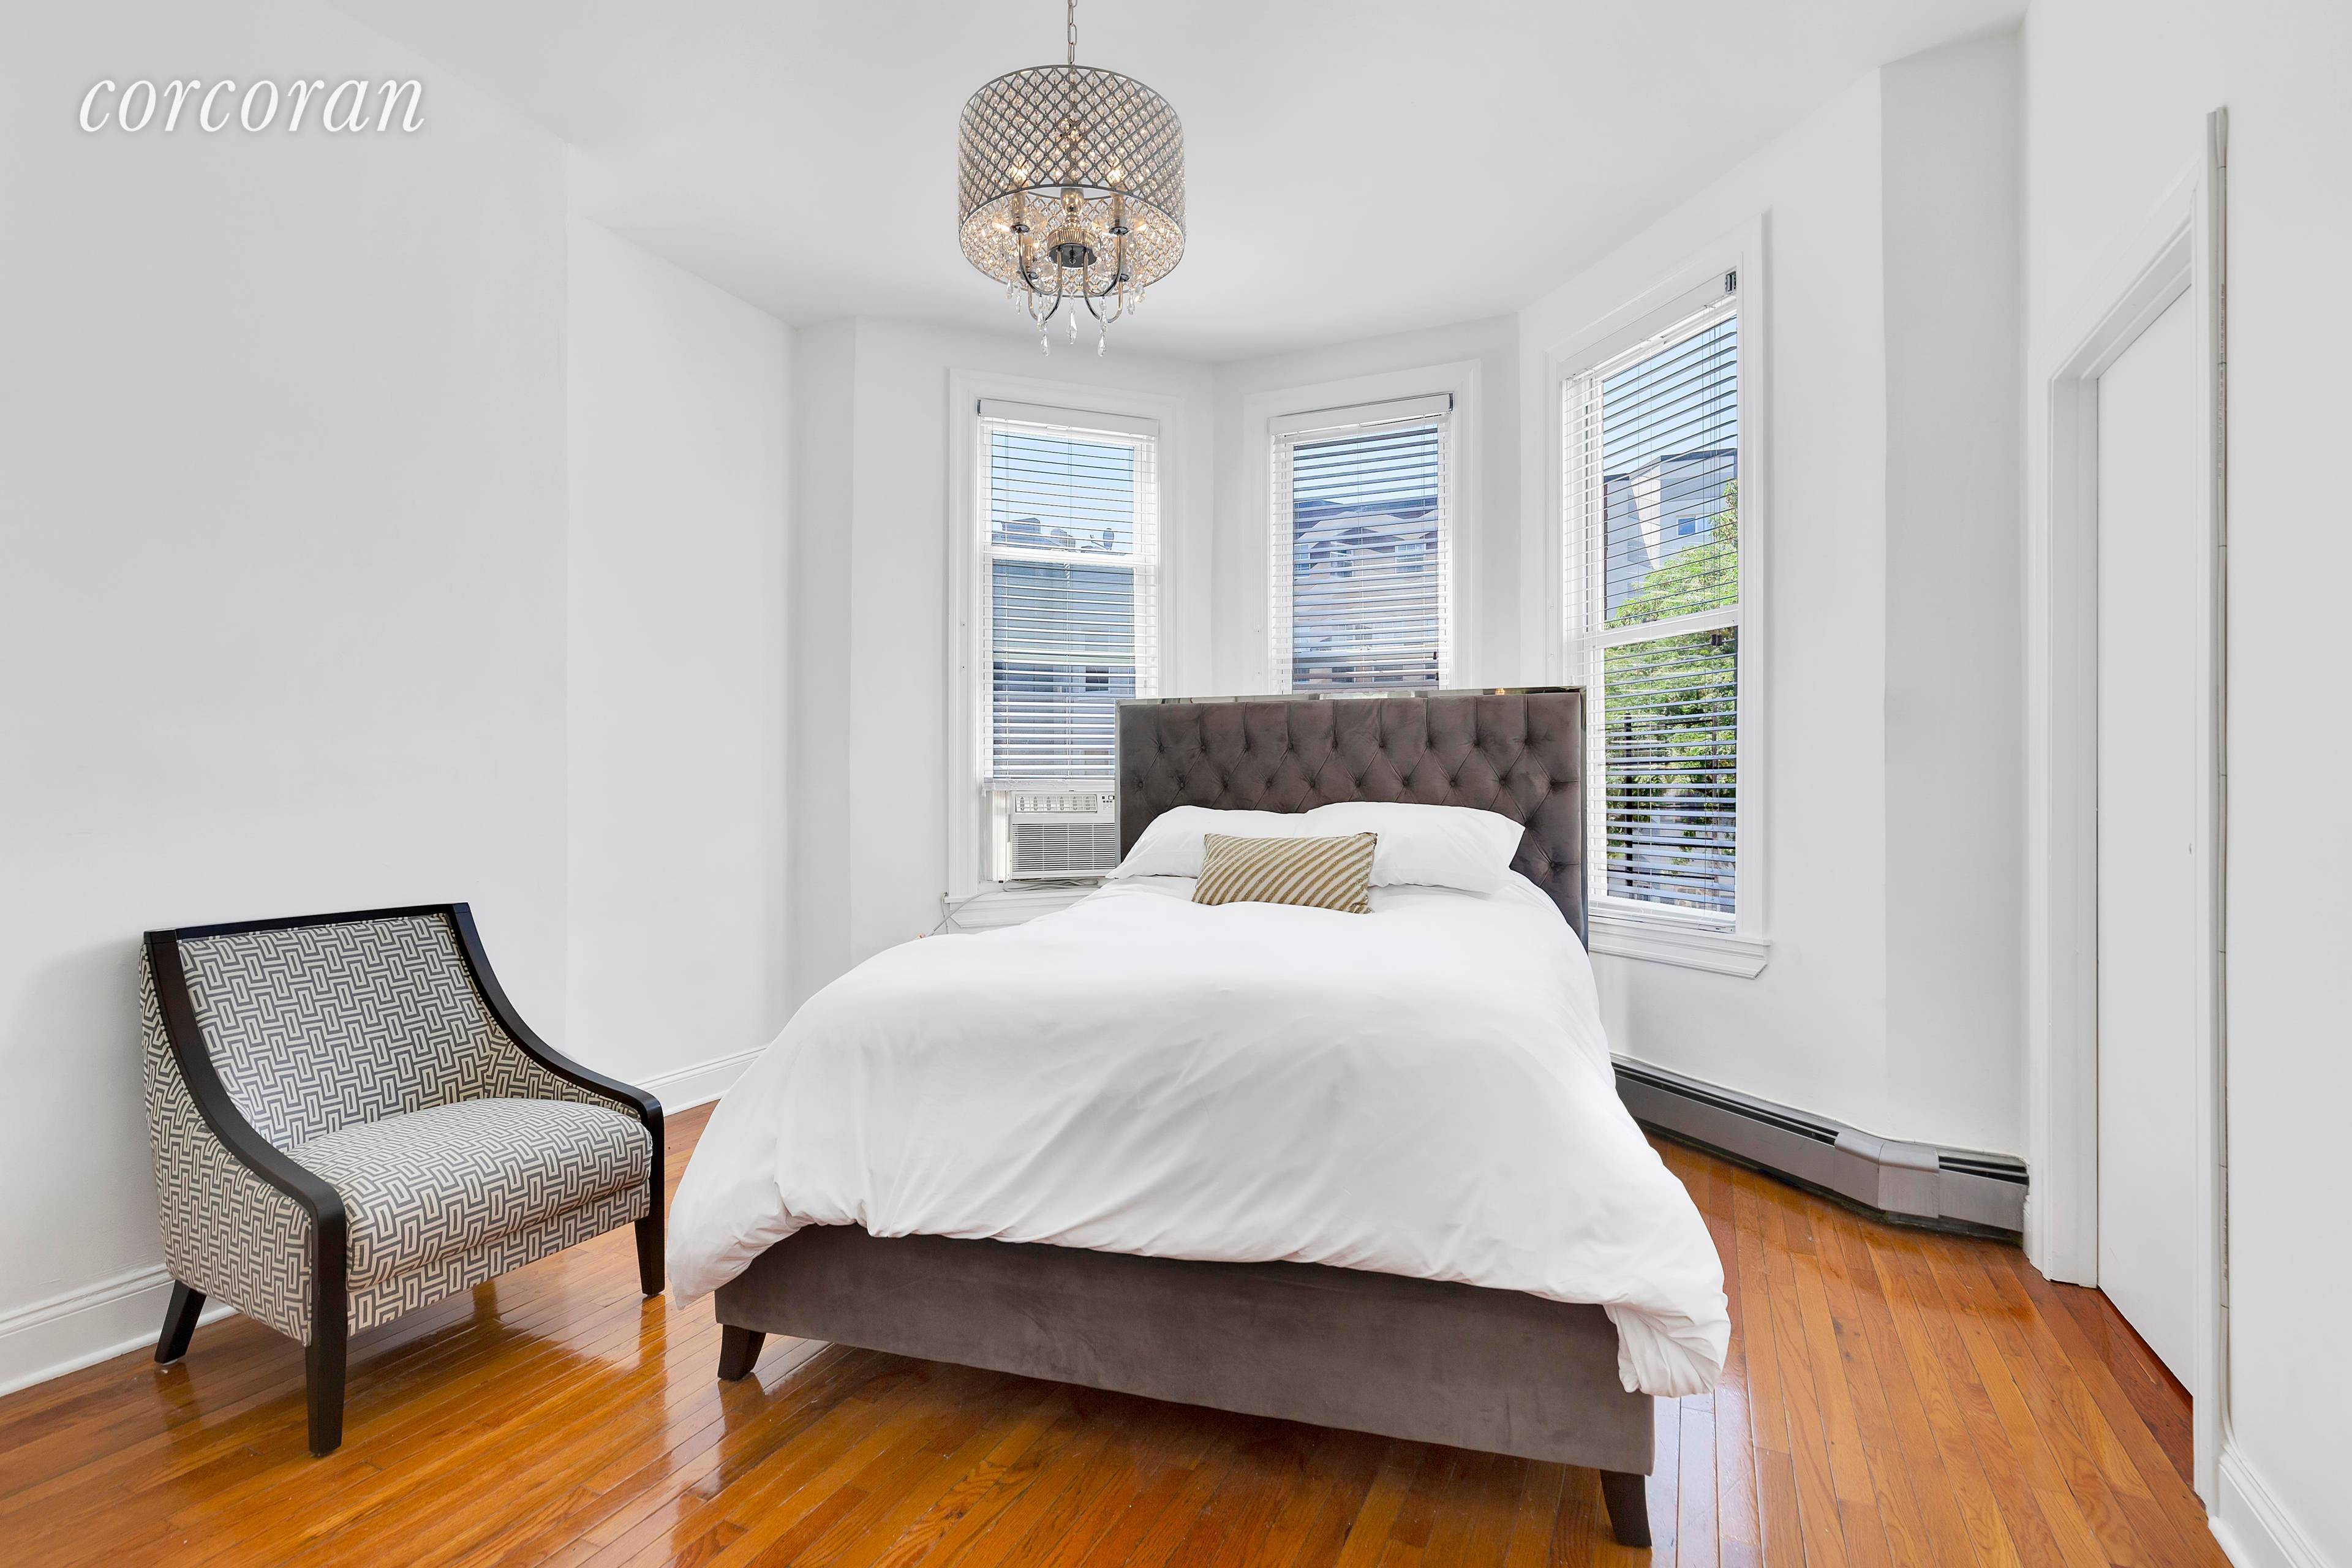 Welcome to this beautiful lavish 3bedroom furnished home with an office and exceptional light at 90 Cornelia street a block away from the J and M trains.